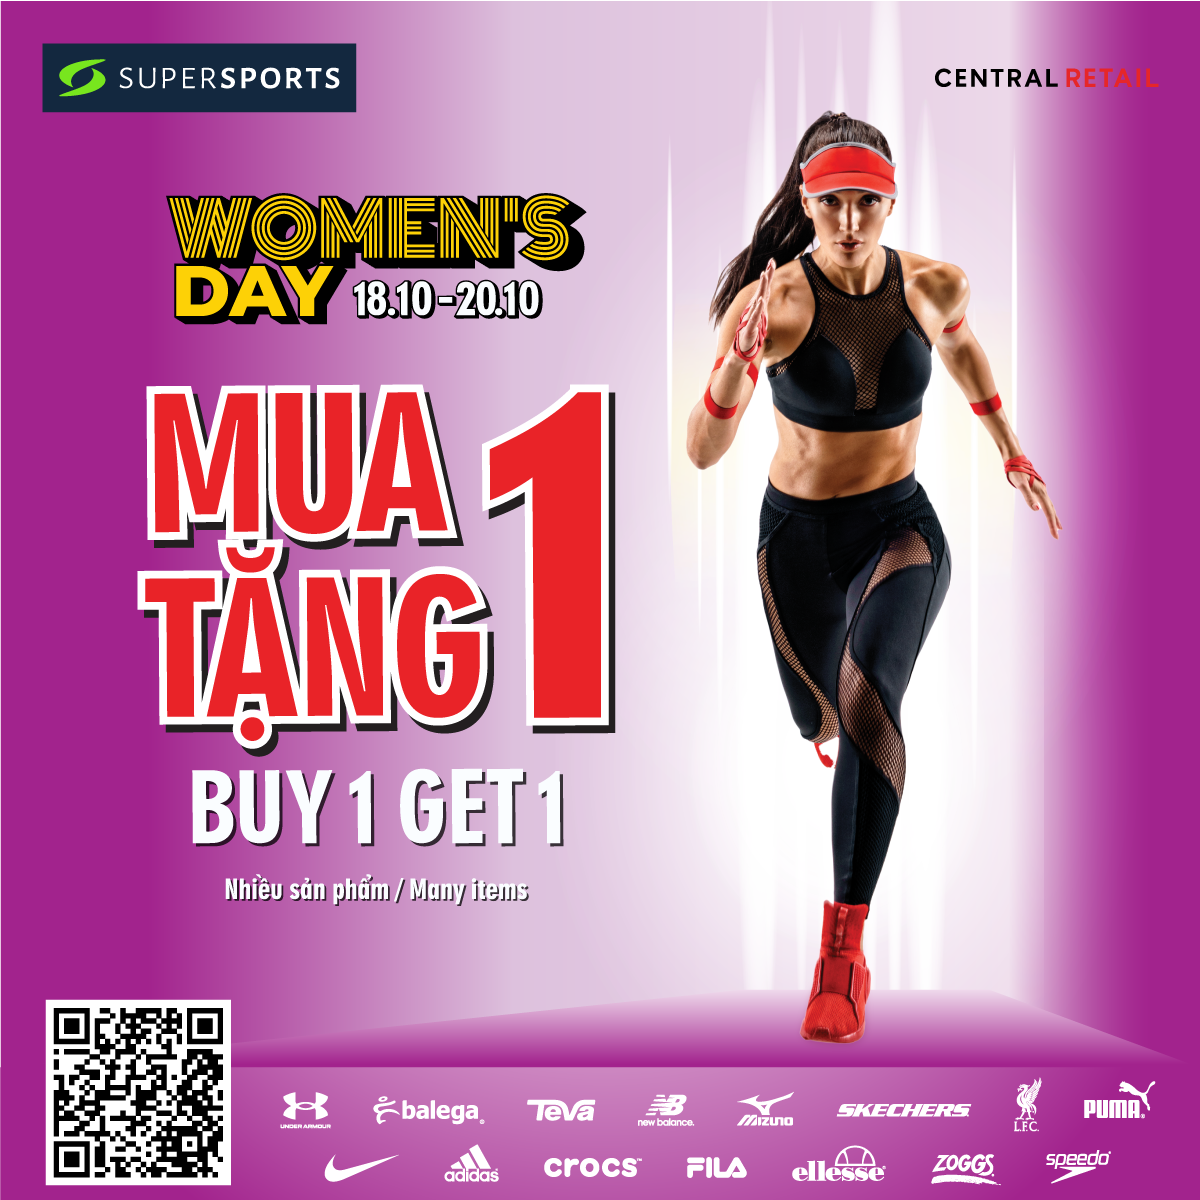 HAPPY WOMEN’S DAY – BUY 1 GET 1 MANY SUPER GREAT DEALS AT SUPERSPORTS